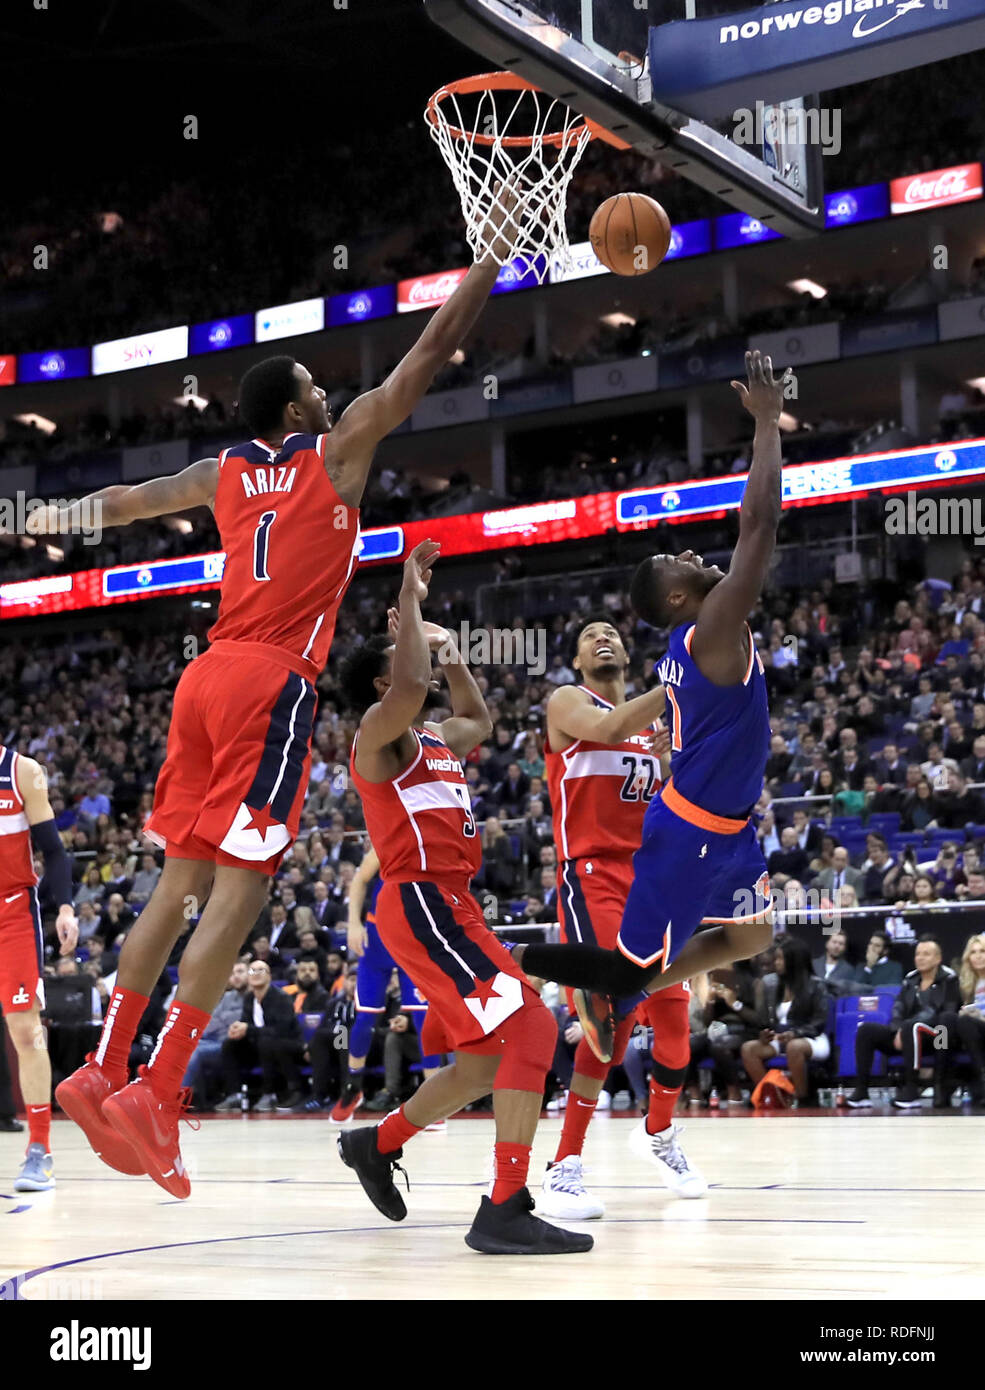 New York Knicks' Emmanuel Mudiay (right) dives for the basket during the NBA London Game 2019 at the O2 Arena, London. Stock Photo